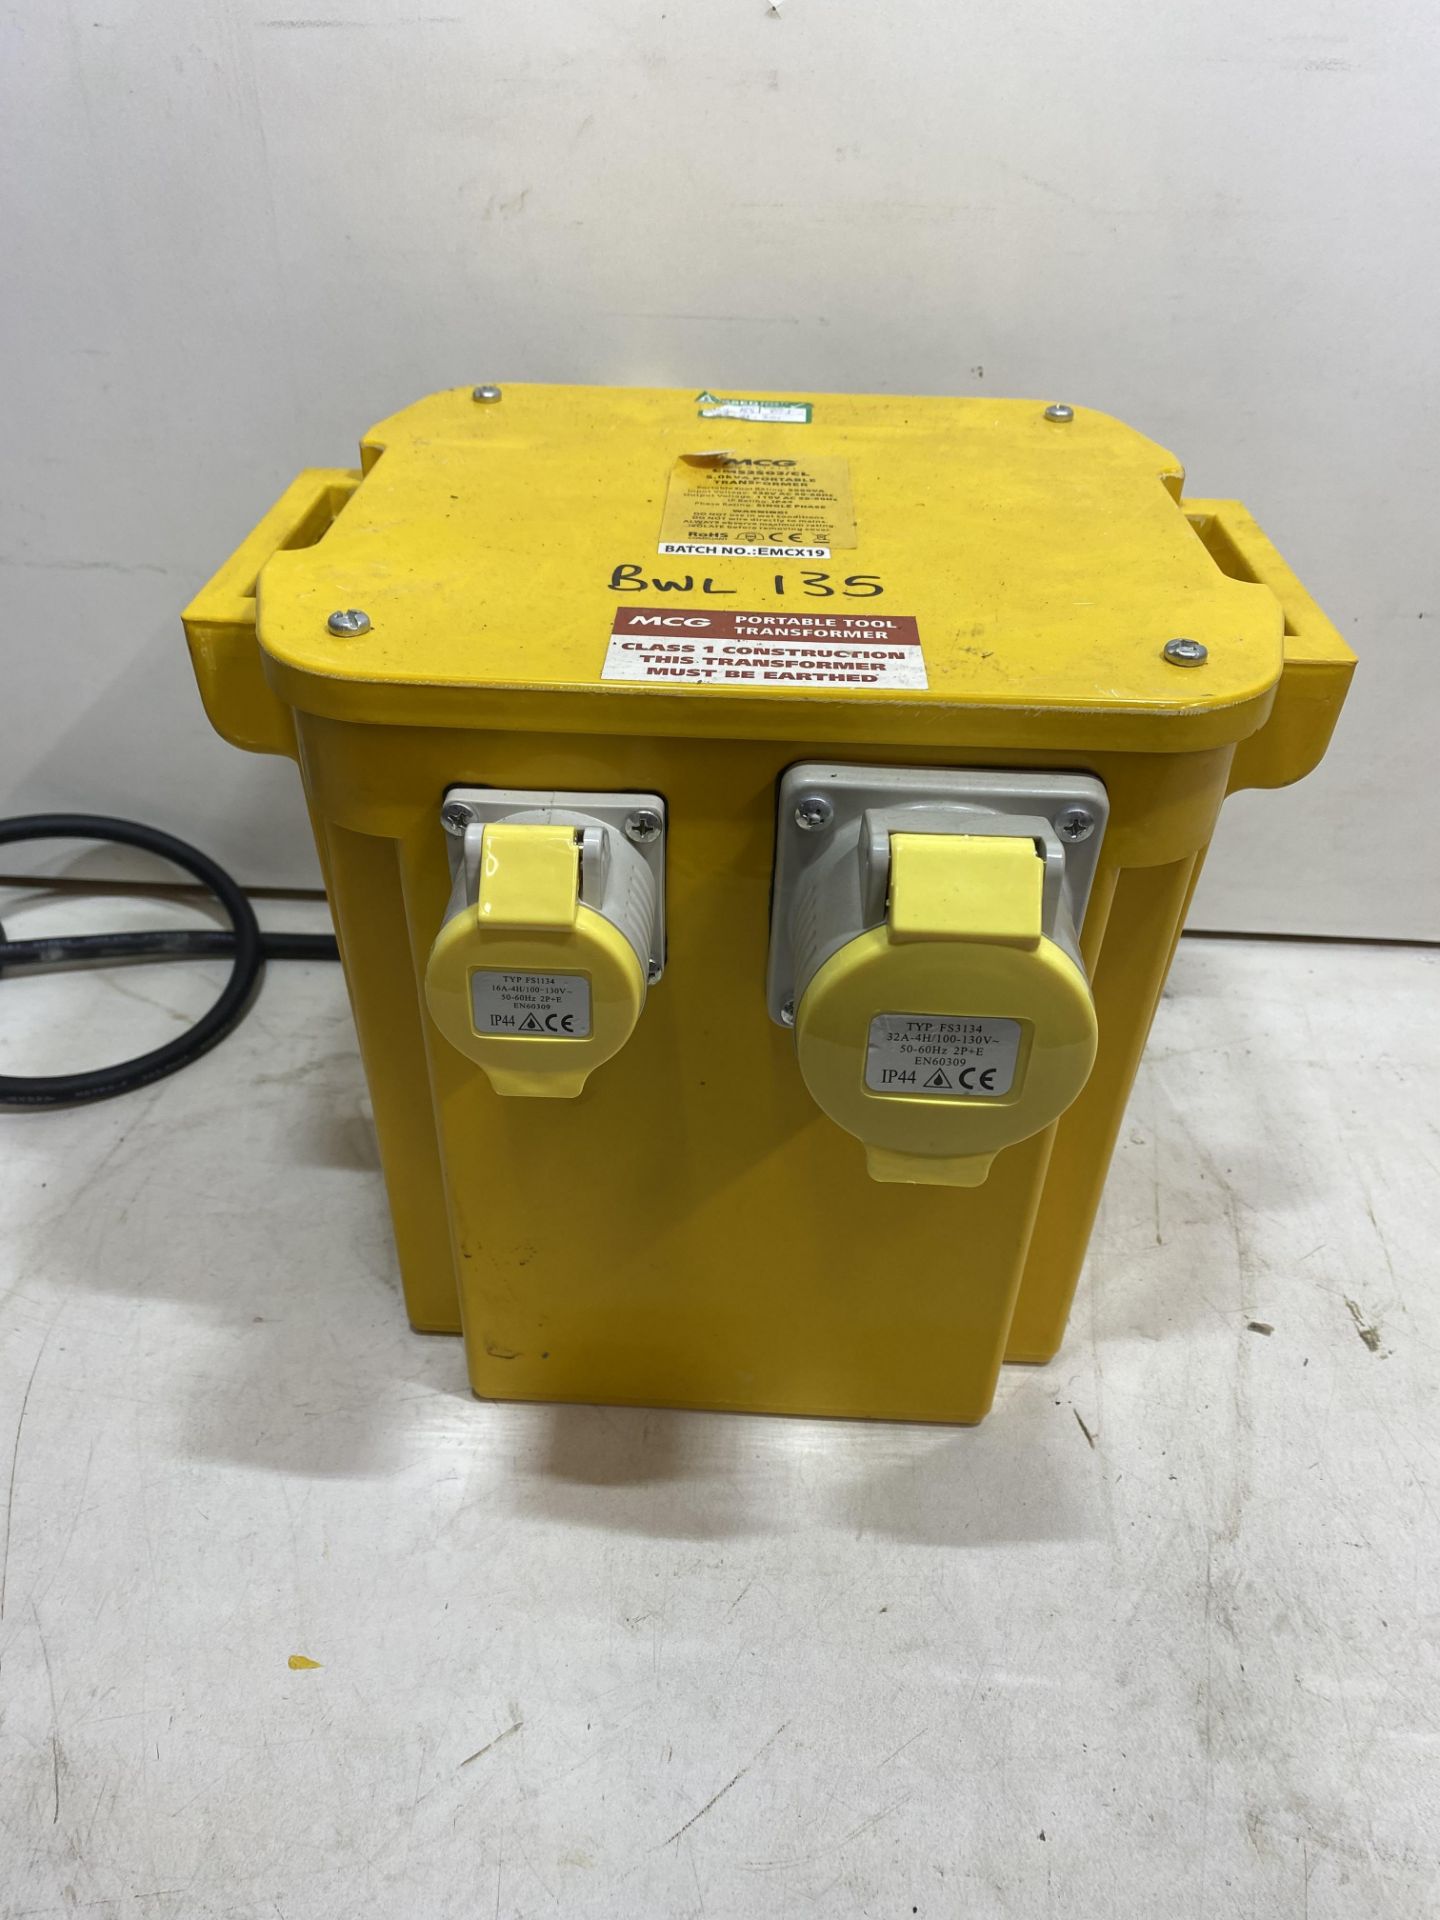 4 x MCG Industrial CM2503/CL 5.0kva Single Phase 110v Portable Transformers - Image 3 of 12